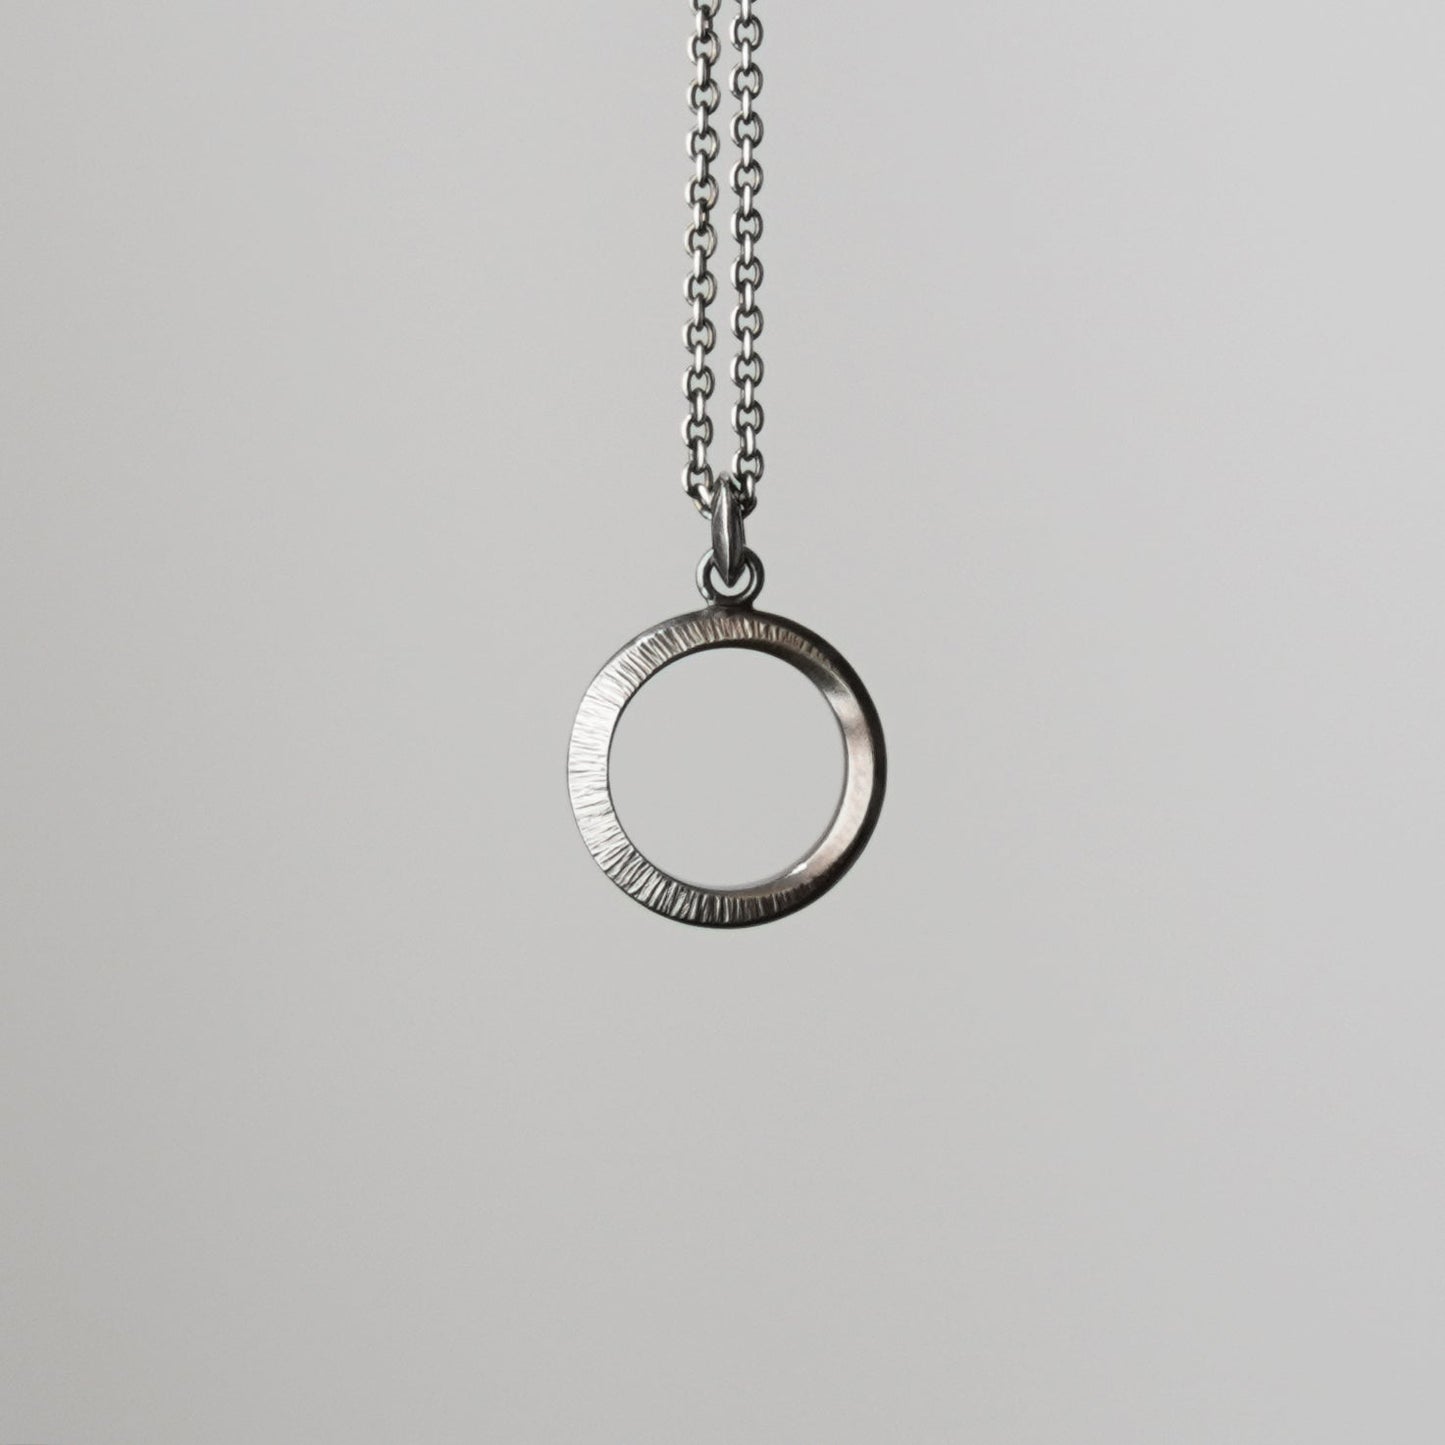 Crescent Moon Hammered Circle Necklace - Oxidised Silver - Aisling Chou Studio